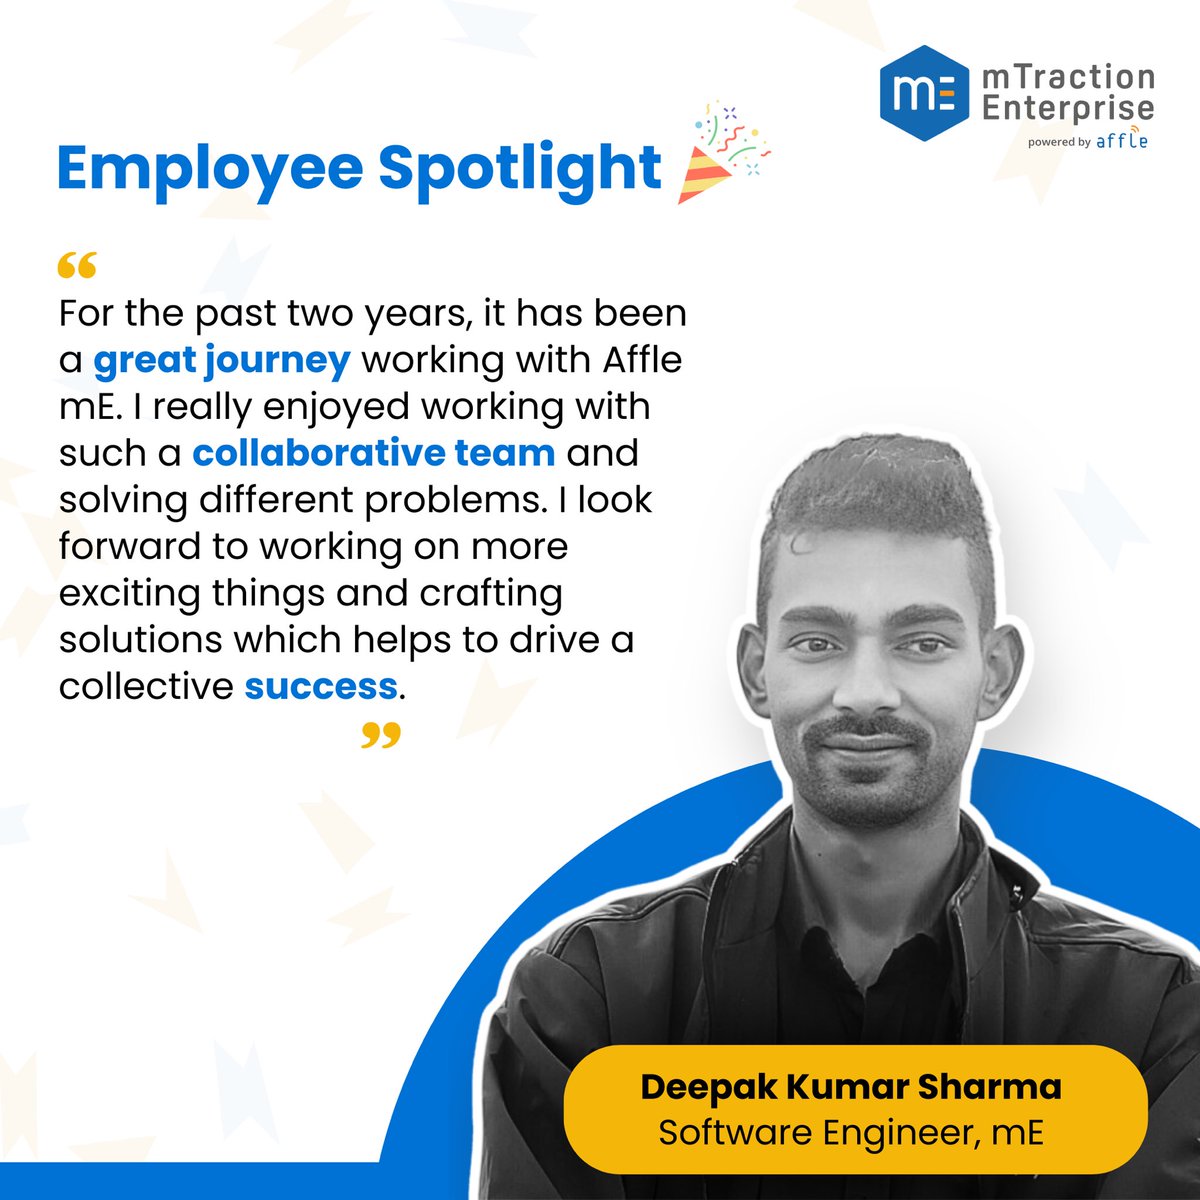 Congratulations Deepak Kumar!
Happy #workanniversary!
Your expertise & commitment have been instrumental in our growth & success. We appreciate your determination & positive attitude that make you such a valuable asset to our team.
#CelebratingYou #EmployeeSpotlight #mTractioners